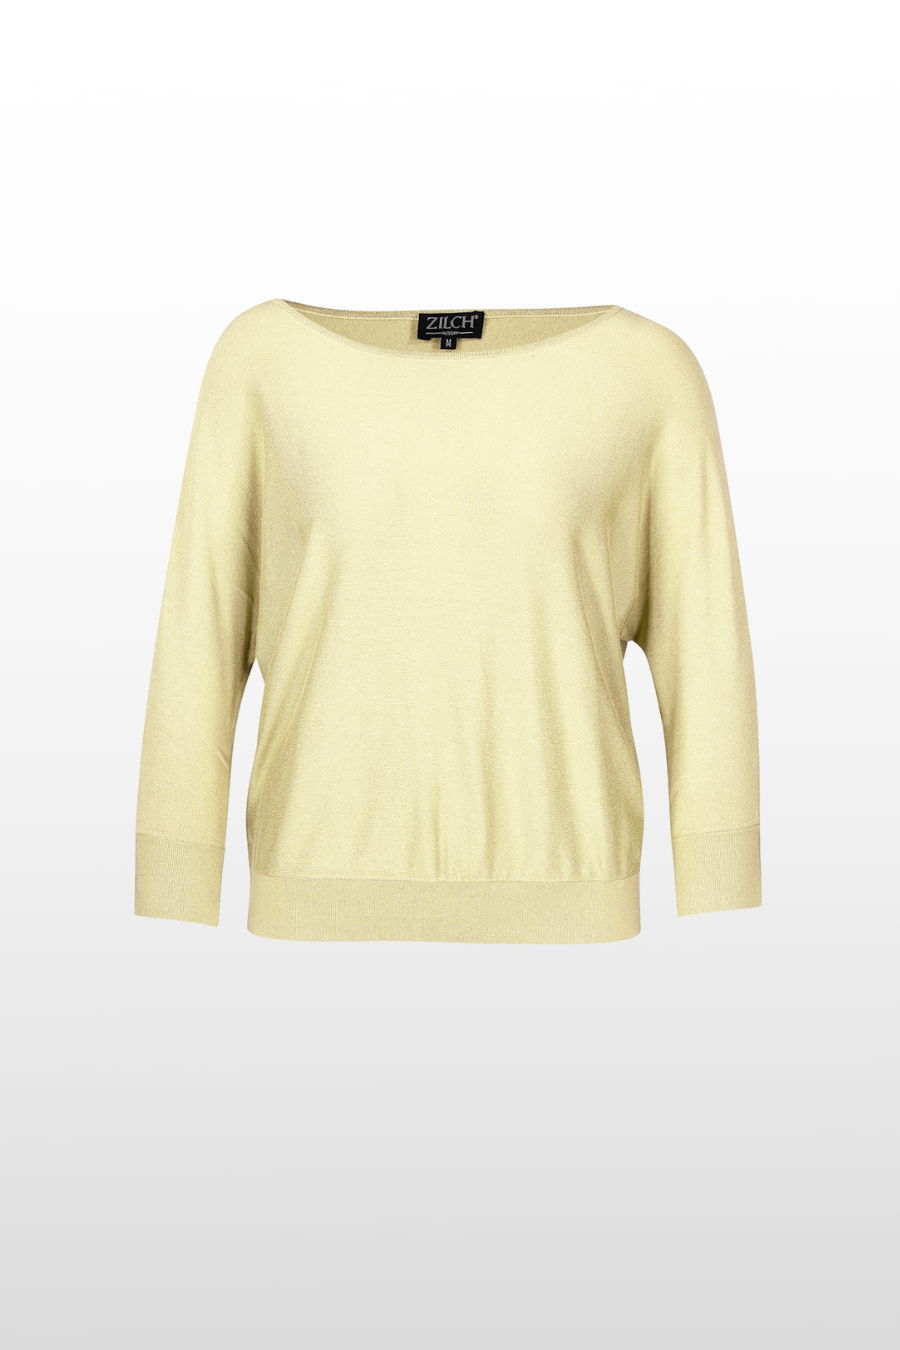 relaxed fit, bamboo long sleeve top, vanilla white